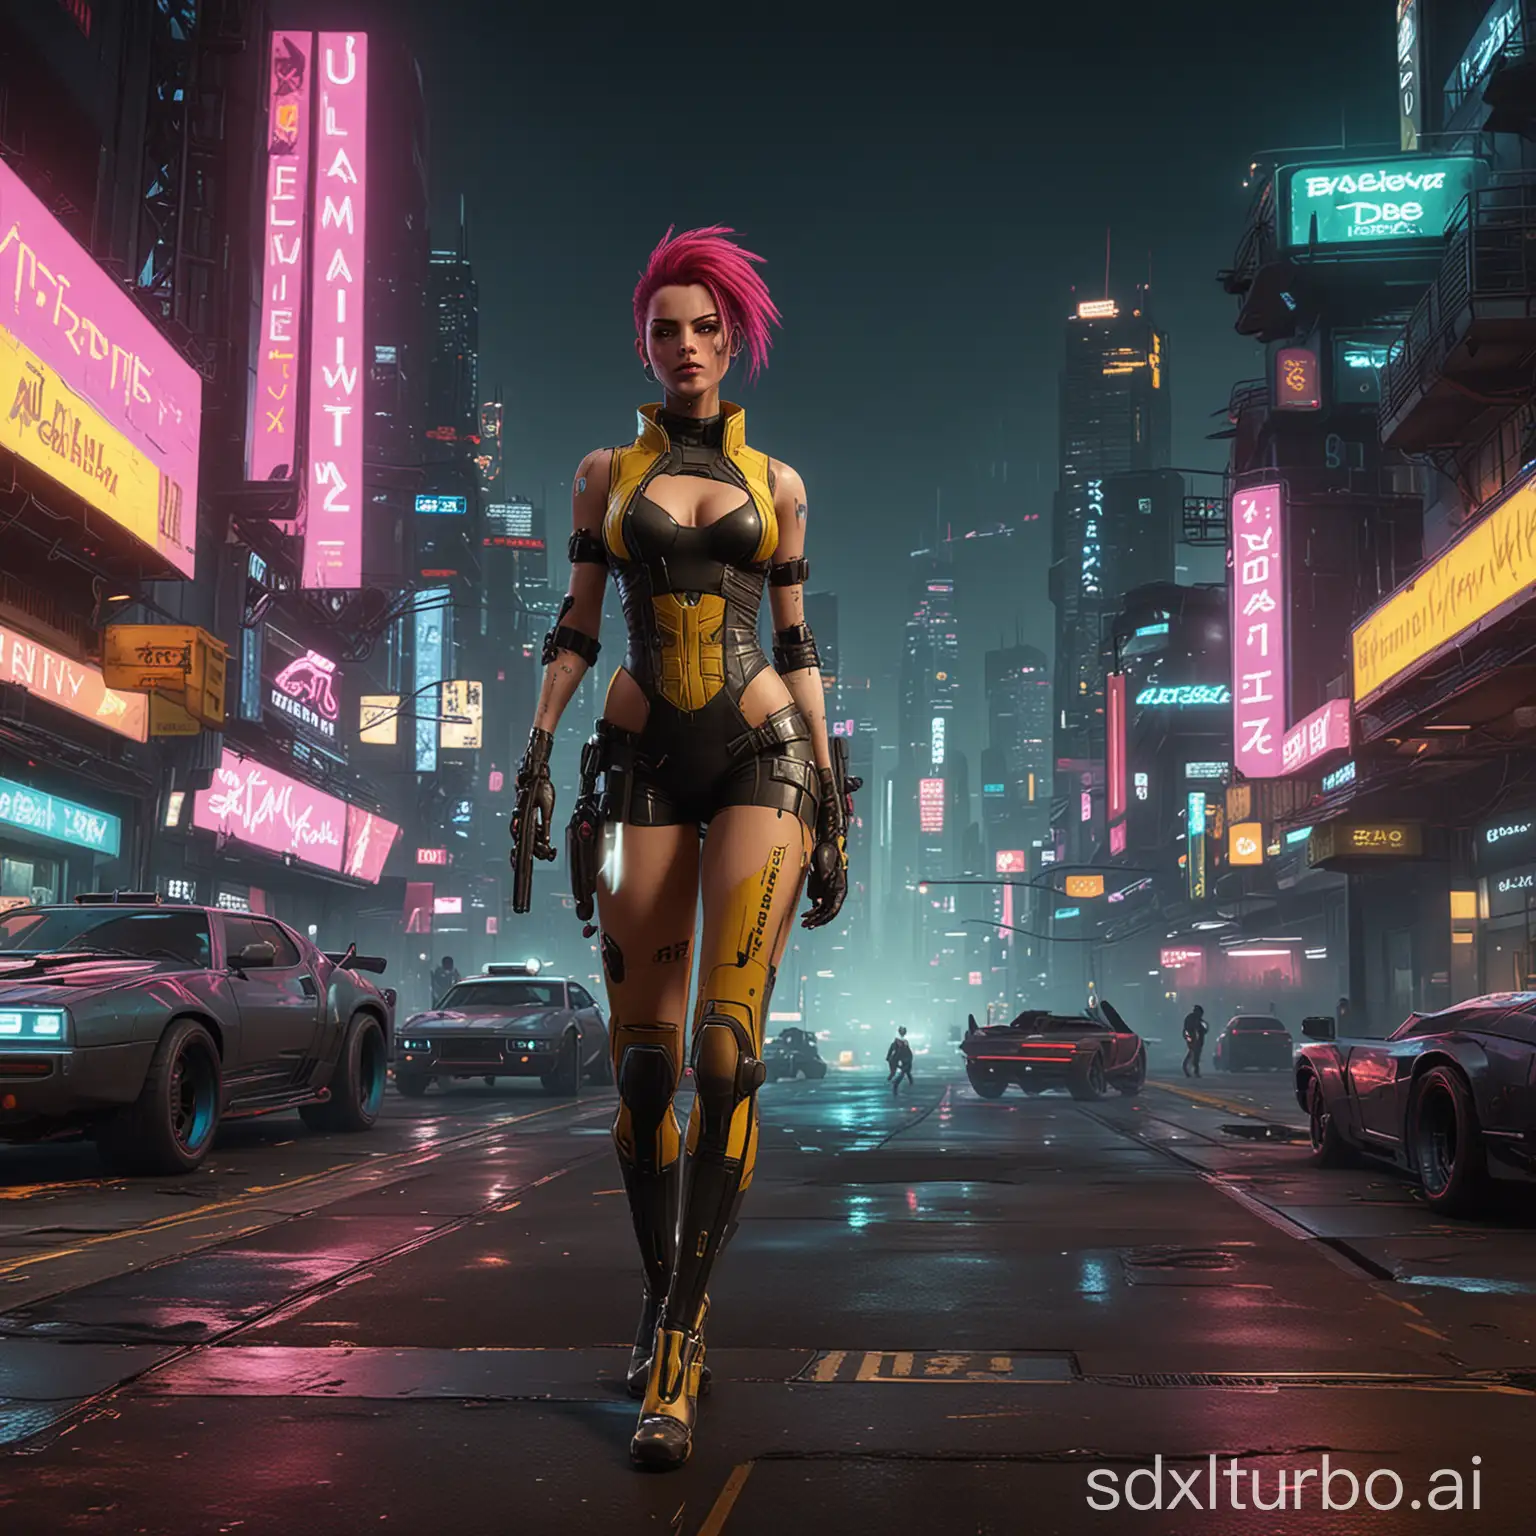 Create an image that features a vibrant, neon-lit cityscape of Night City as the background. In the foreground, showcase a mix of iconic characters and elements from popular mods. For instance, depict a character with augmented cyberware from the Cyberware-EX mod, flying cars from the Let There Be Flight mod, and stylish new hairstyles from the Phantom Liberty Hair Collection. To add a techy feel, include holographic UI elements or mod installation screens around the characters, highlighting the variety of enhancements mods bring to the game. Use bold, futuristic fonts for the title "Ultimate Cyberpunk 2077 Mods" at the top of the image. 